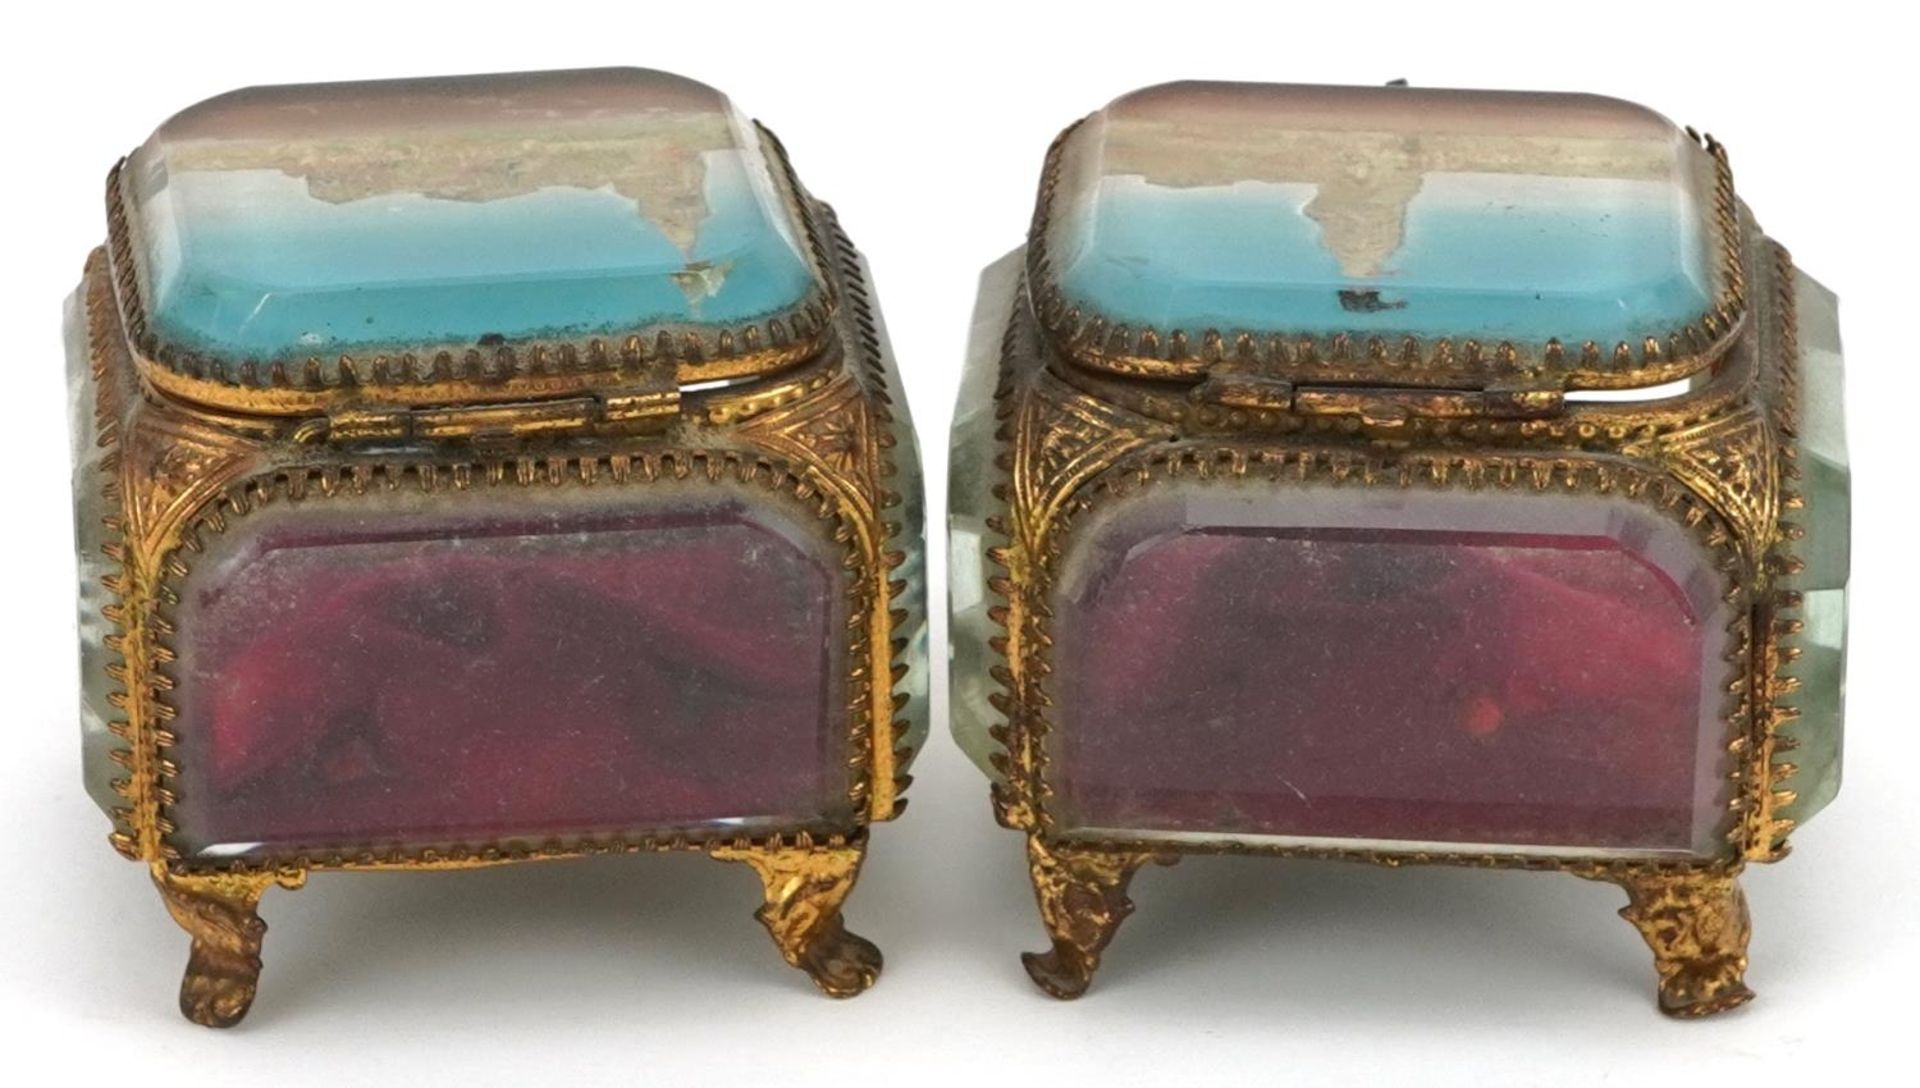 Pair of 19th century Grand Tour jewel caskets with bevelled glass panels and silk button back - Image 3 of 4